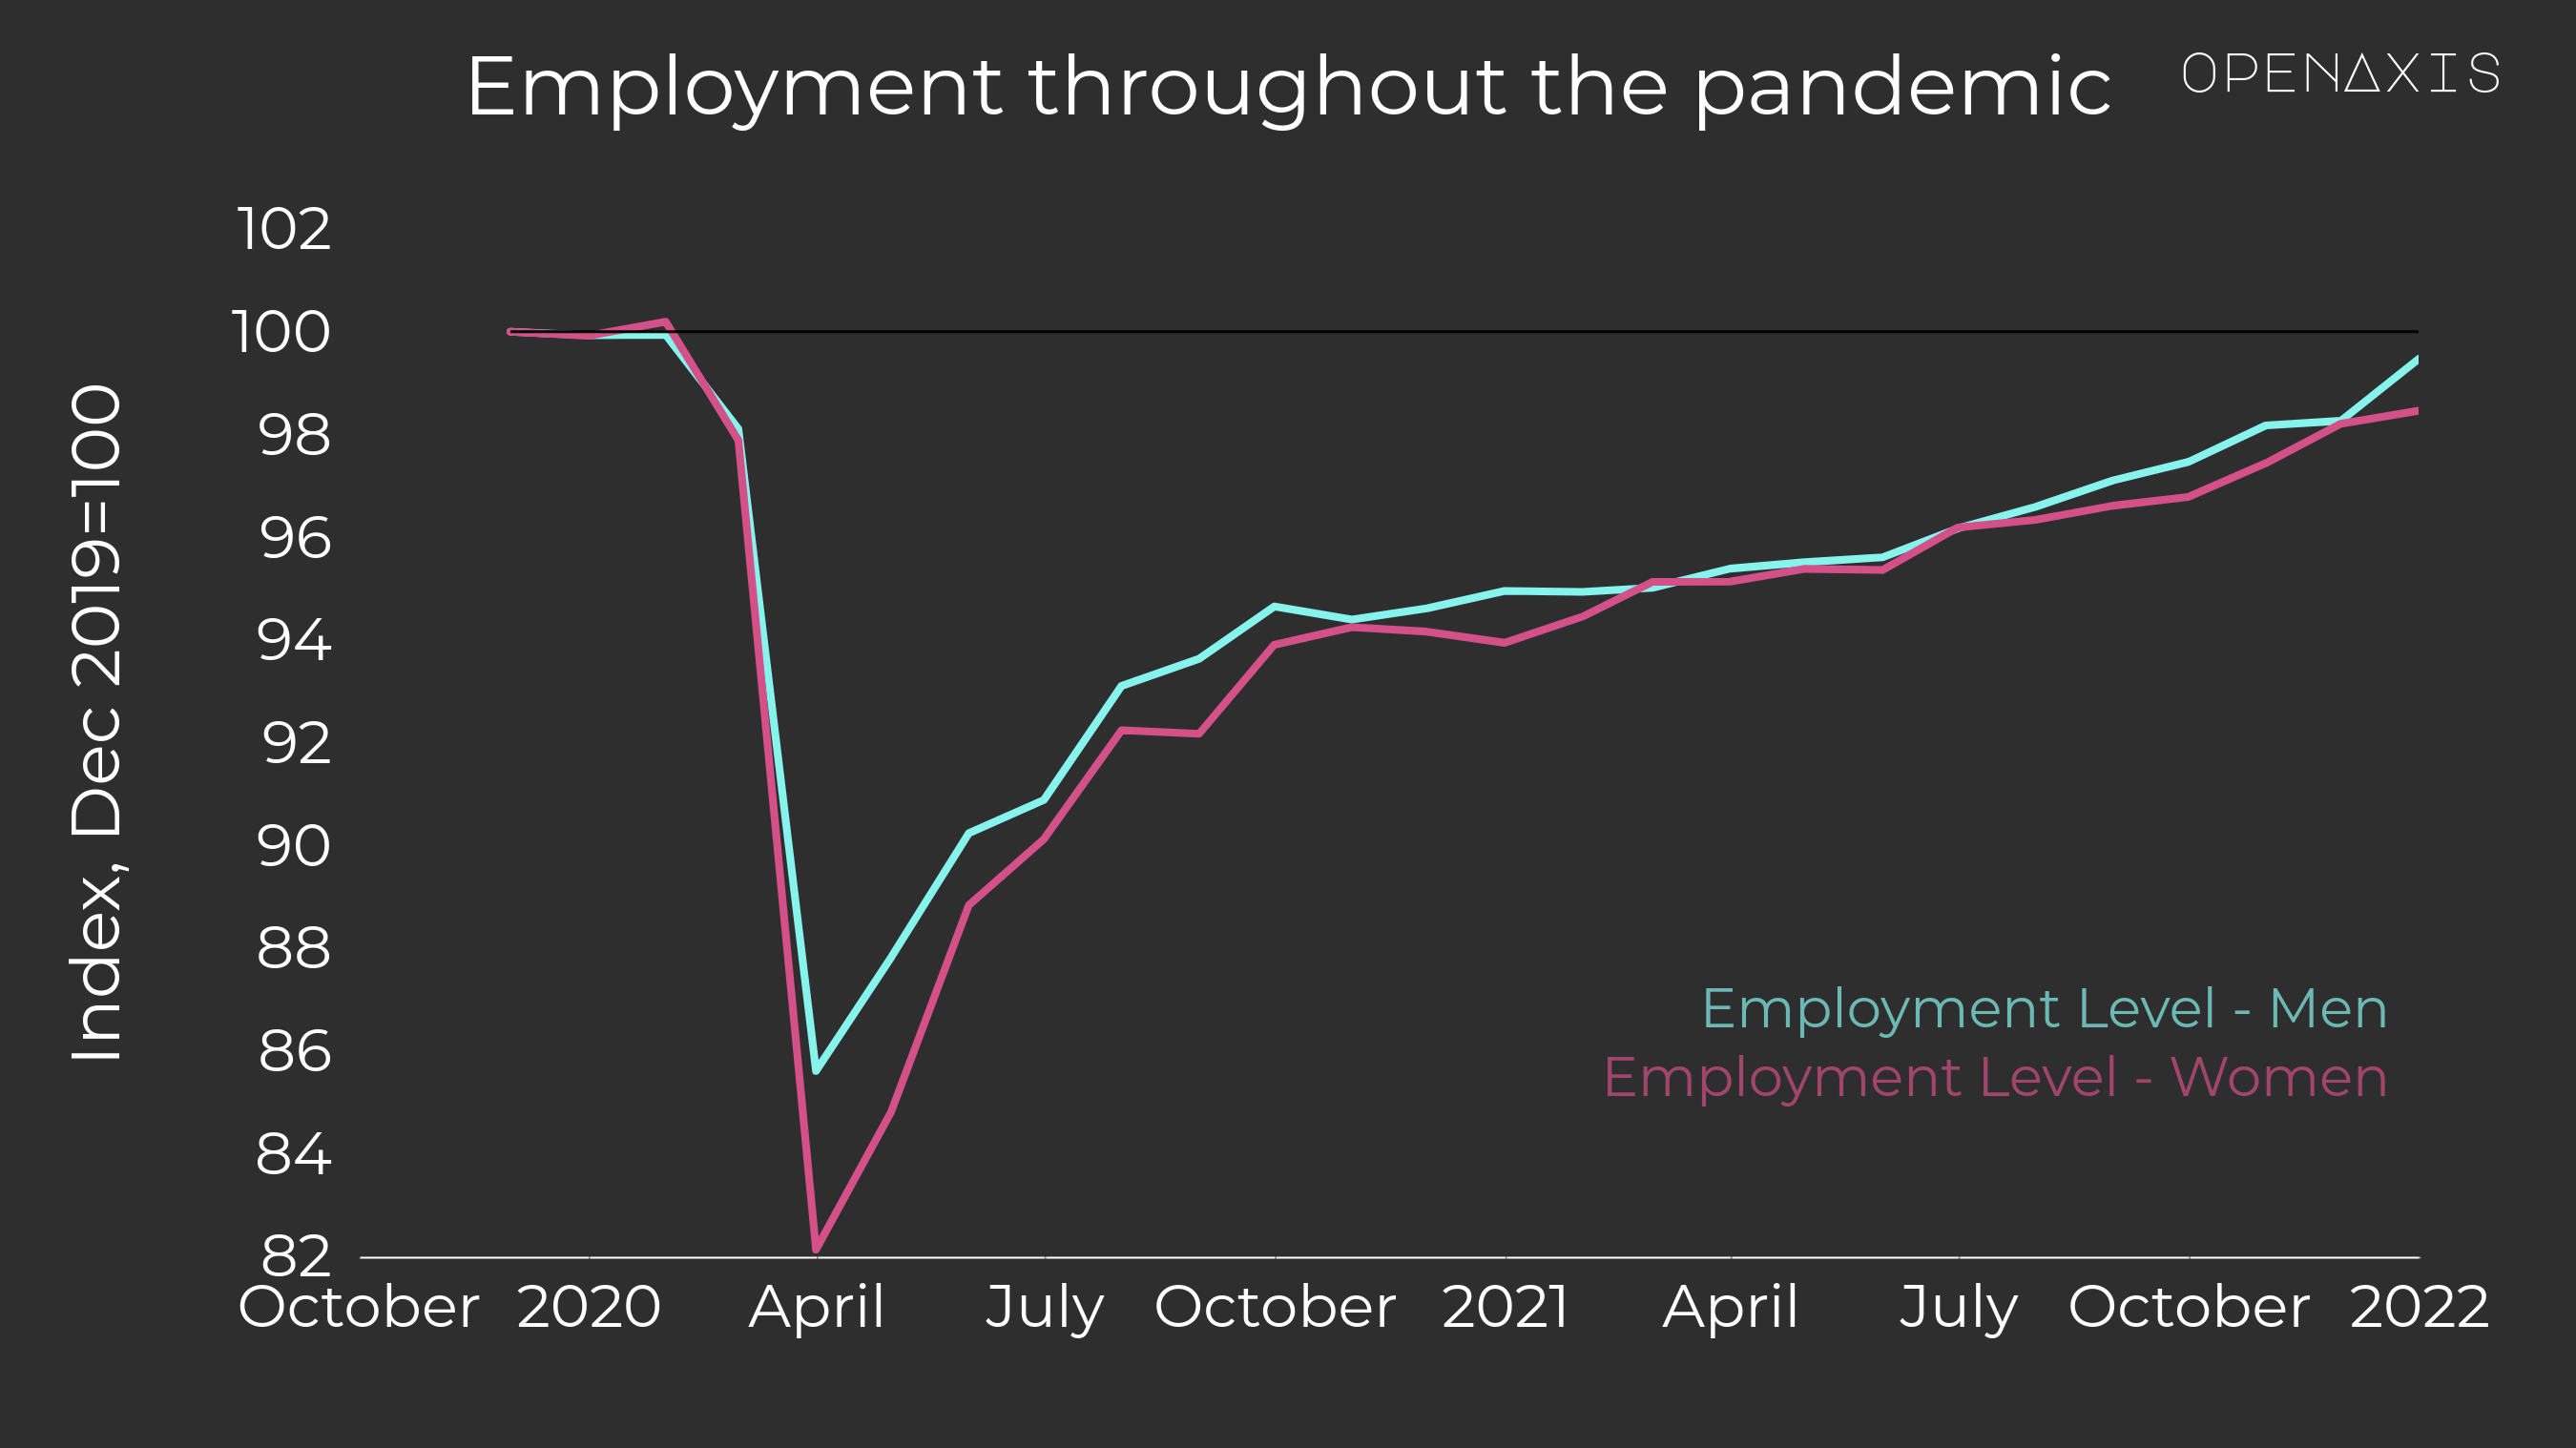 "Employment throughout the pandemic"